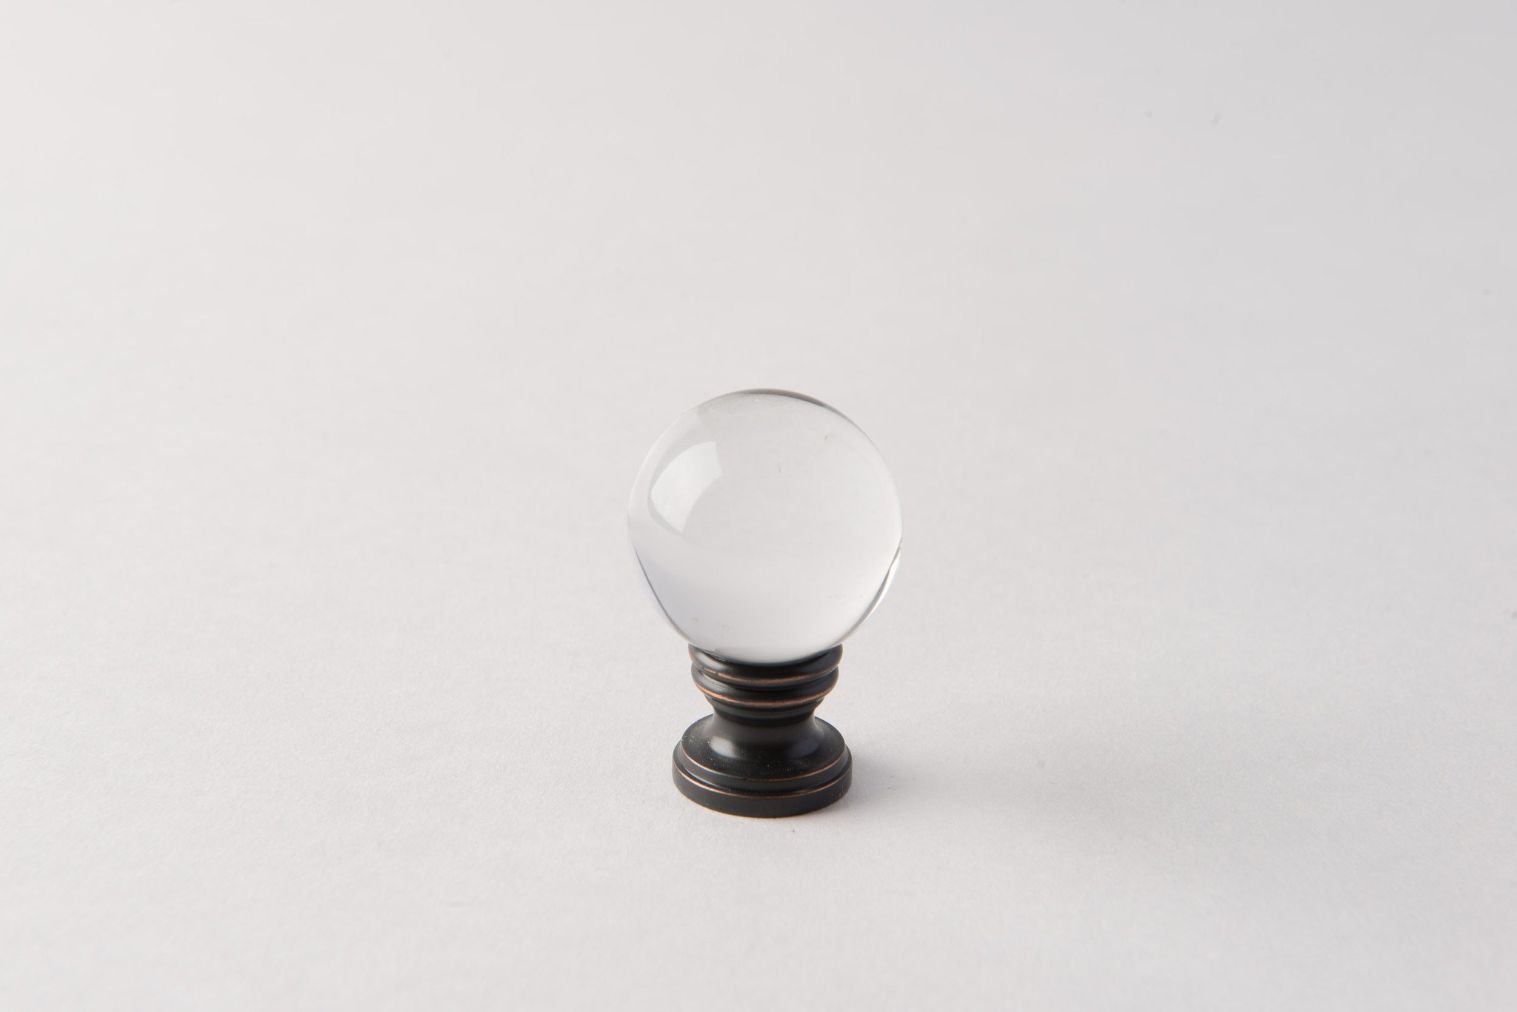 https://www.hotel-lamps.com/resources/assets/images/product_images/1599817052.Oiled Bronze_Crystal Ball 30mm.jpg